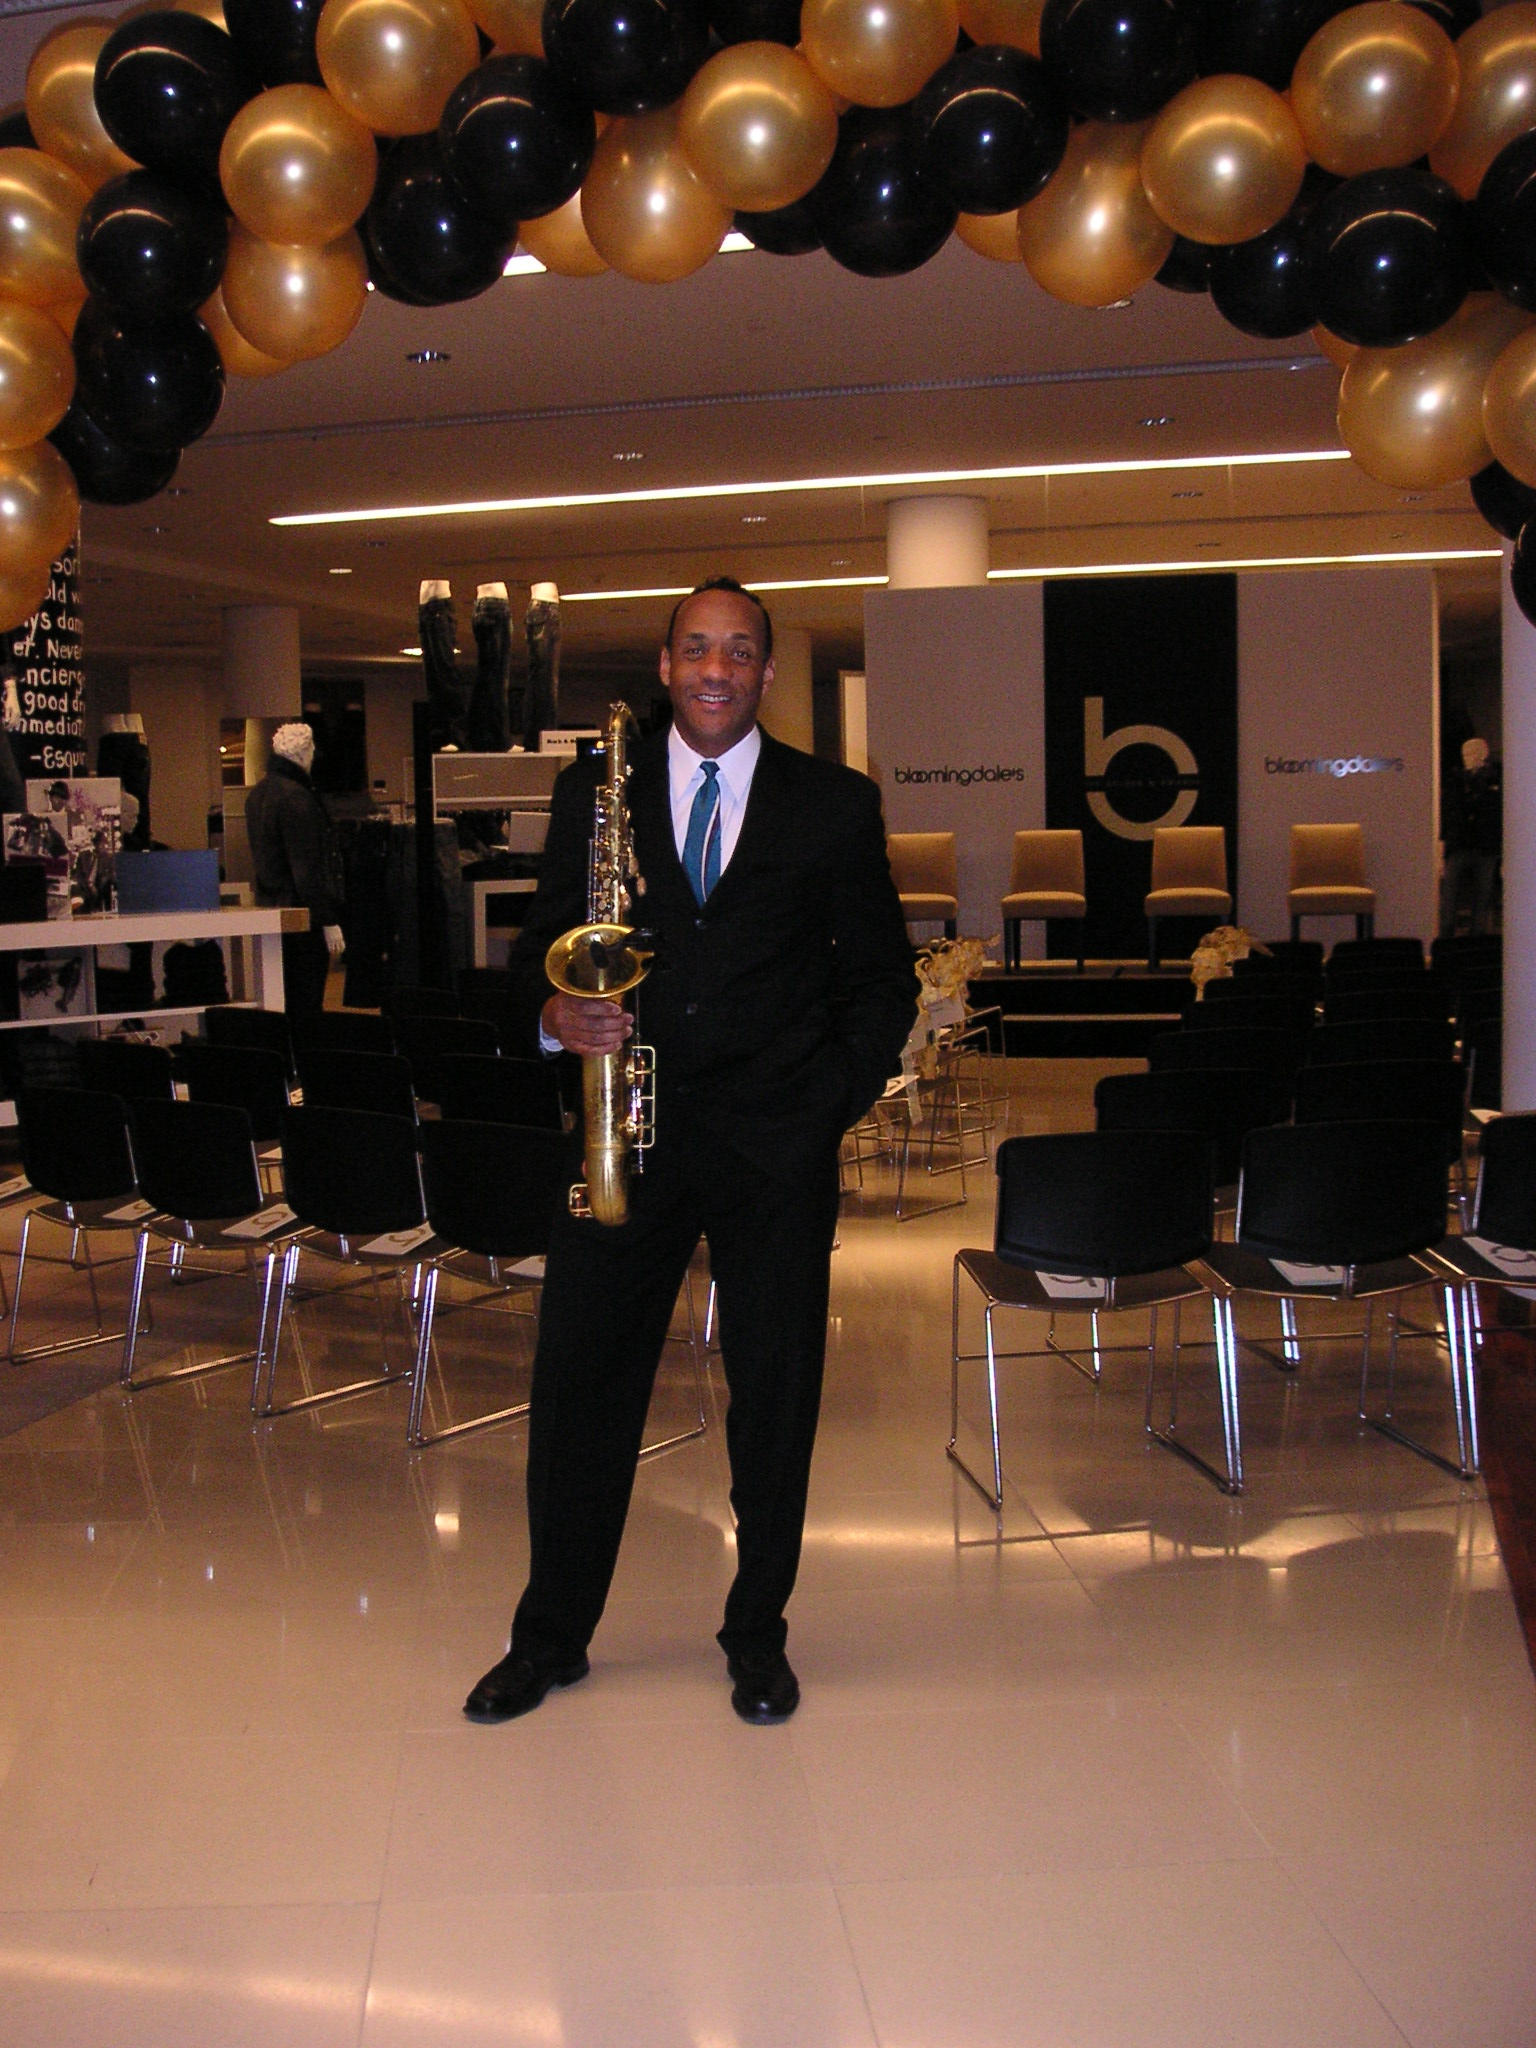 bloomingdales-corp-event-2009